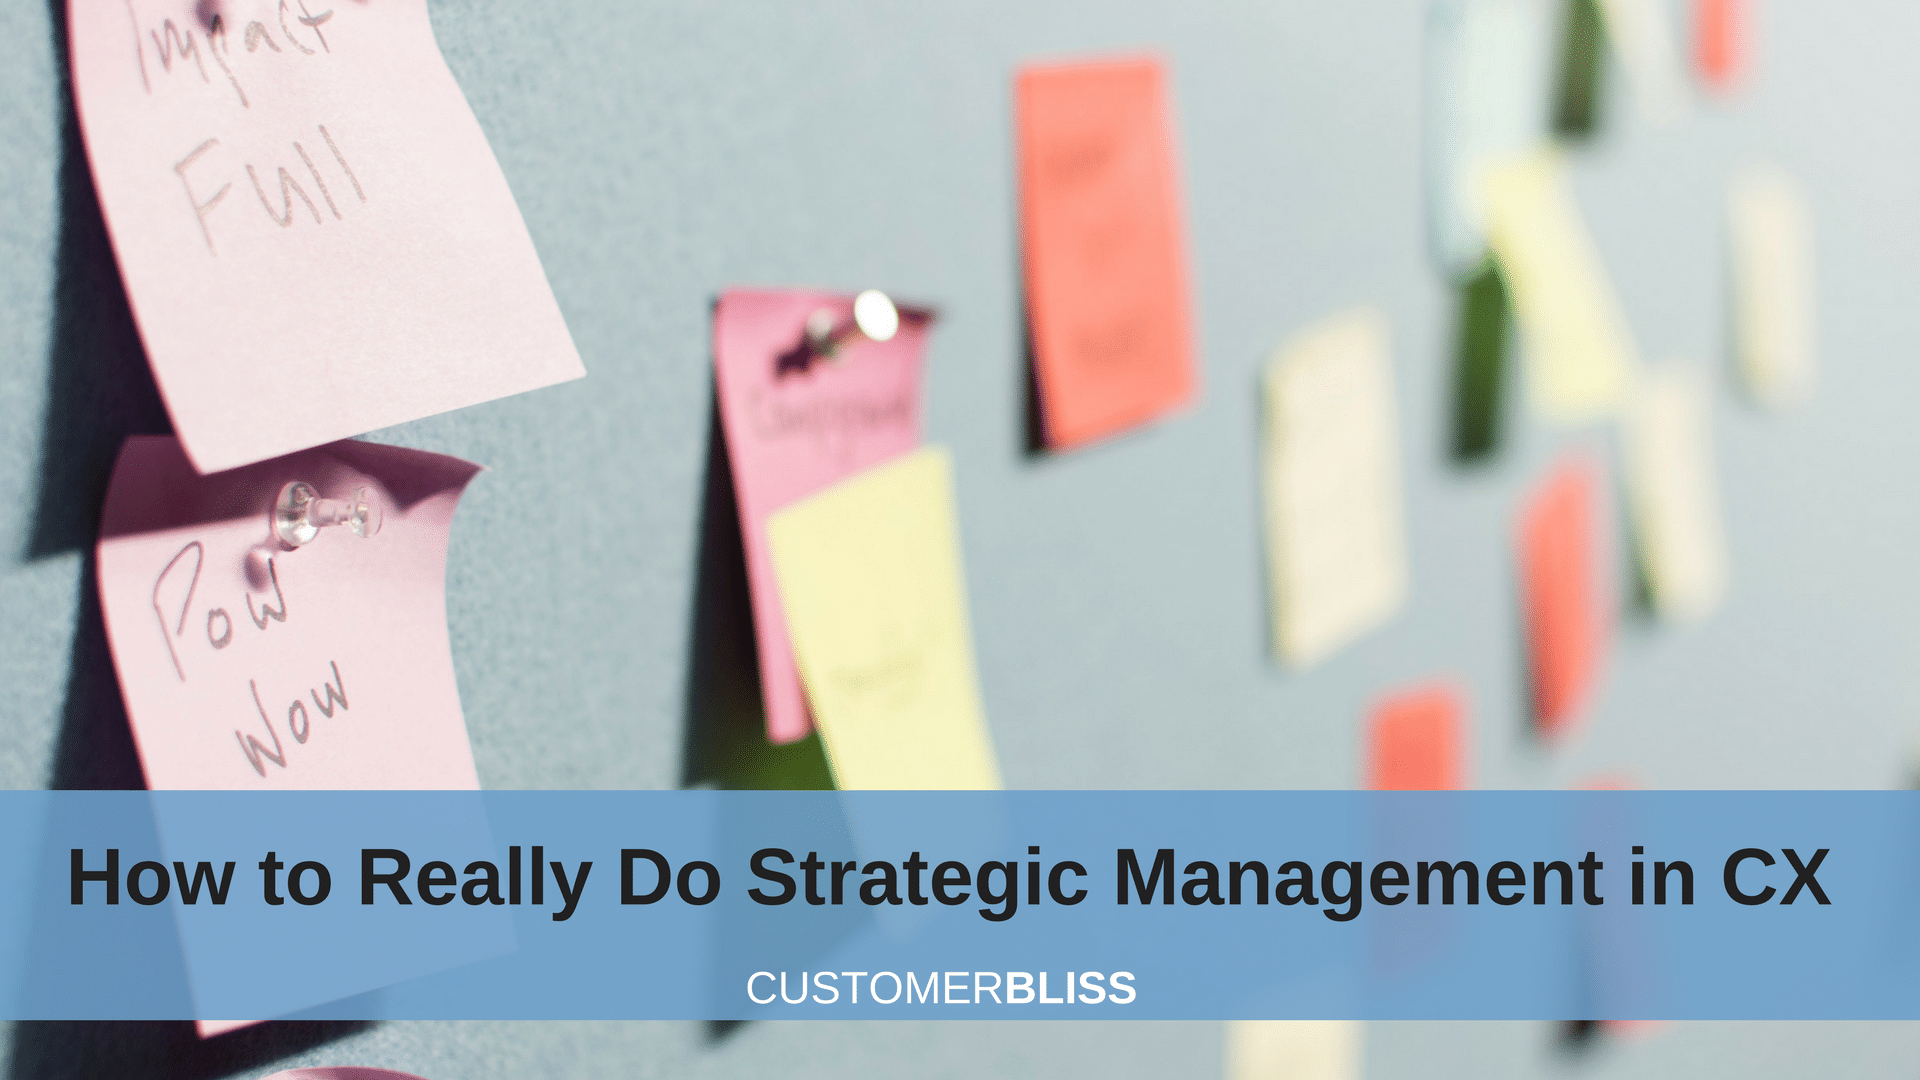 HOW TO REALLY DO STRATEGIC MANAGEMENT IN CX